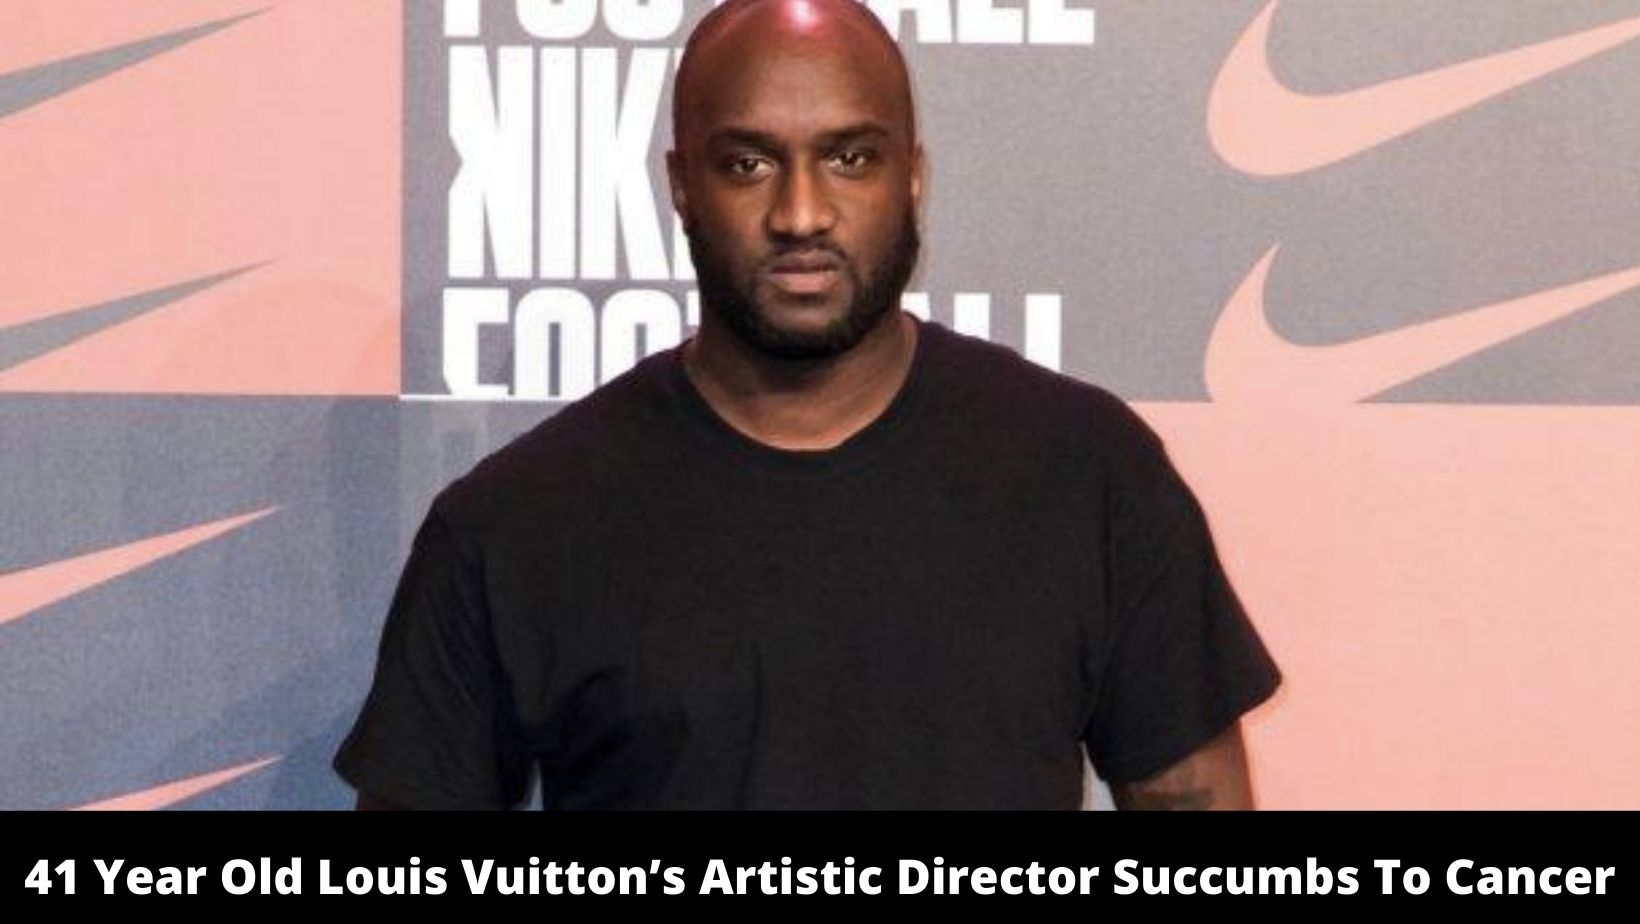 41 Year Old Louis Vuitton’s Artistic Director Succumbs To Cancer